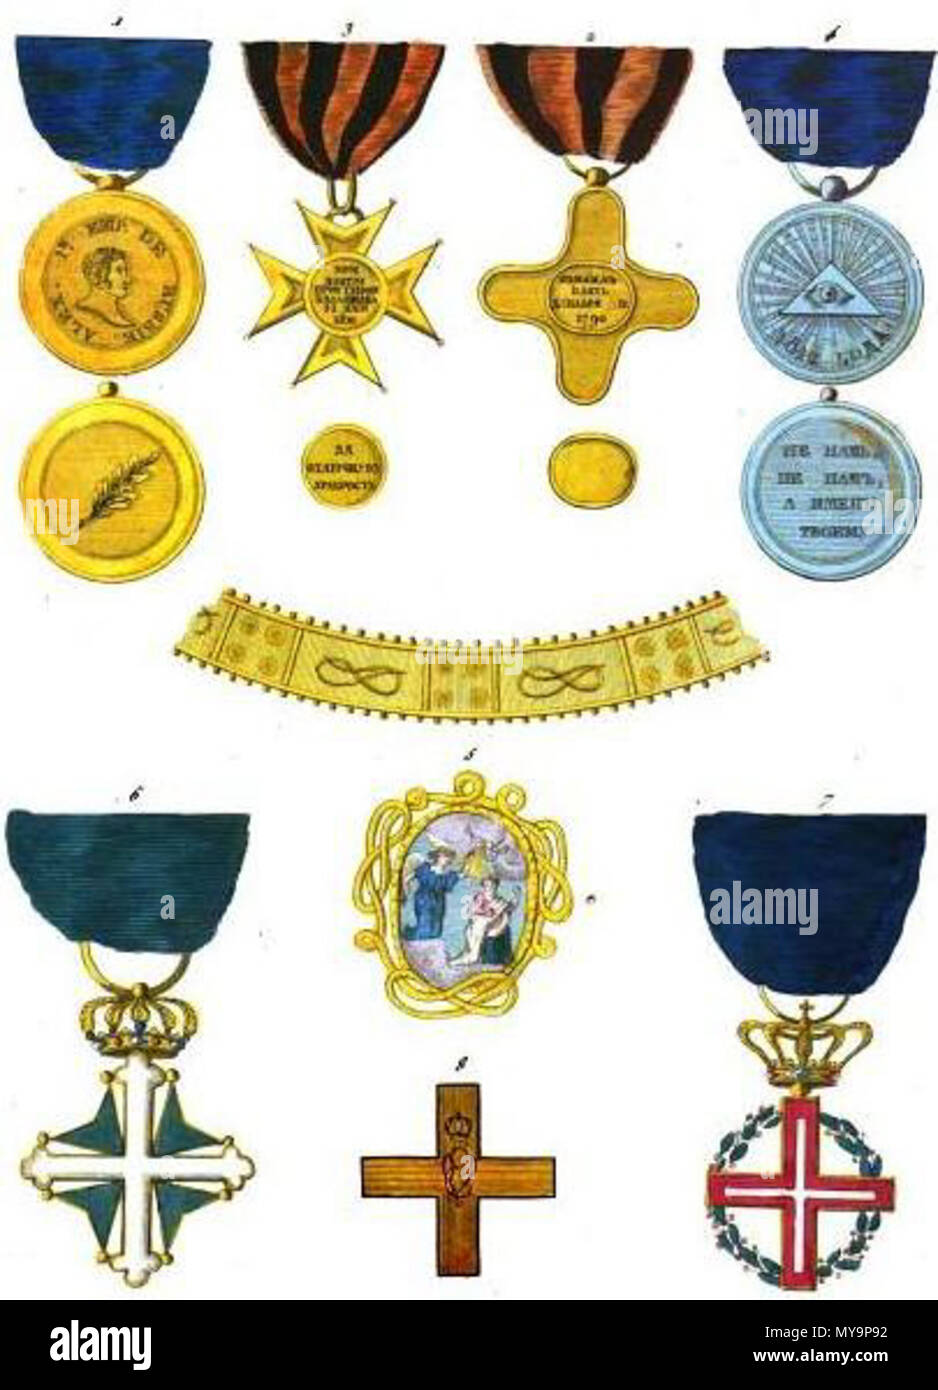 .  Français : Collection historique des ordres de chevalerie civils et militaires... English: Orders of chivalry: 1. Medal for Distinction in gold (Russia) 2. Izmail Cross (Russia) 3. Pazardzhik Cross (Russia) 4. 1812 War Medal in silver (Russia) 5. Order of the Most Holy Annunciation (Italy) 6. Order of Saints Maurice and Lazarus (Italy) 7. Military Order of Savoy, badge (Italy) 8. Military Order of Savoy, star (Italy) . 1820 49 Aristide Michel Perrot - Collection historique des ordres de chevalerie civils et militaires (1820) pl. XXXII Stock Photo